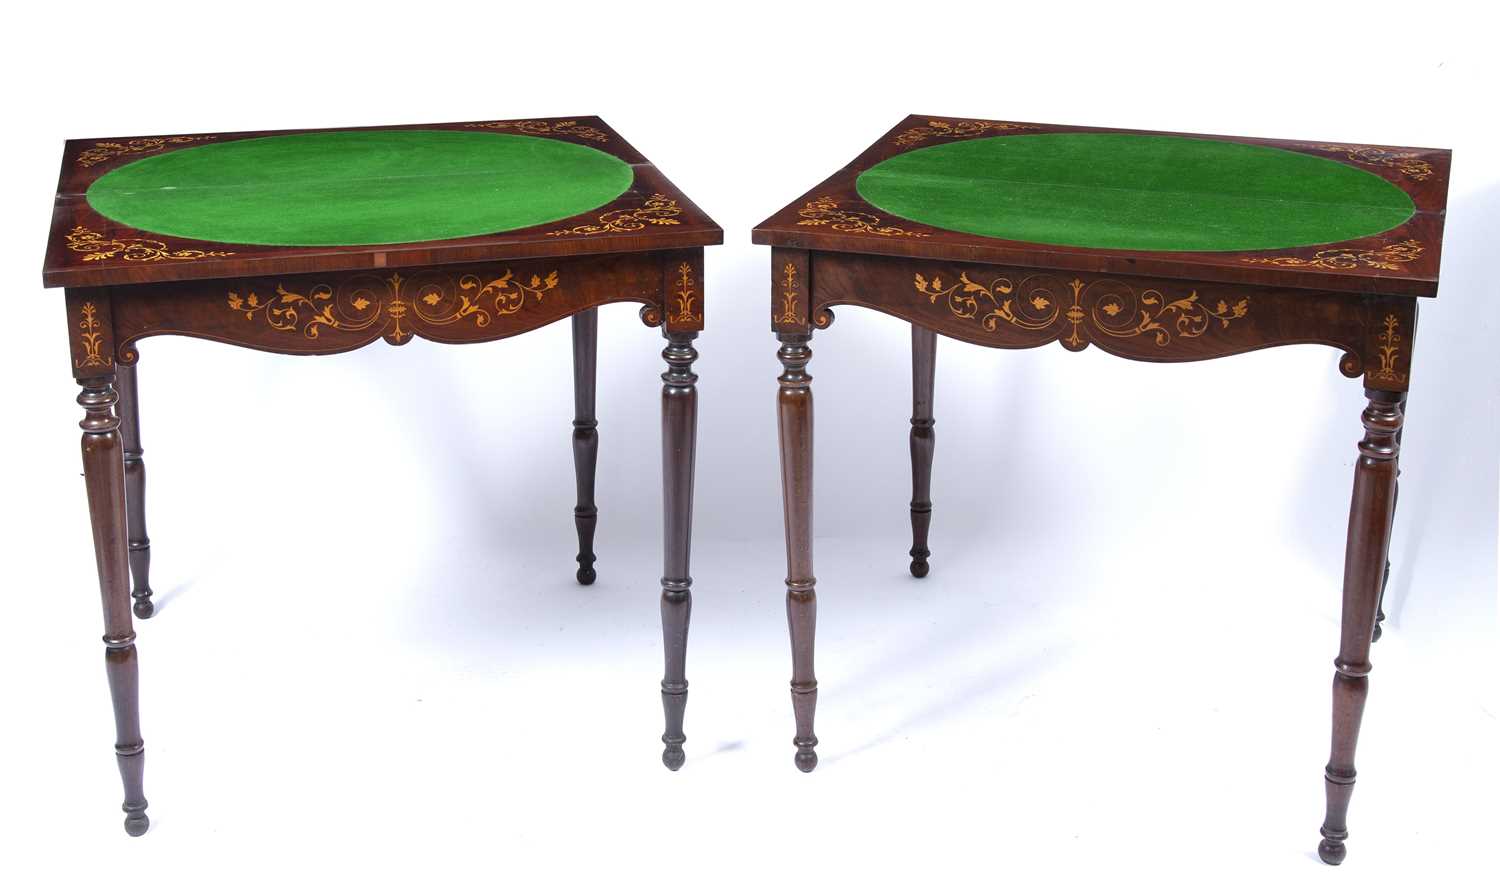 A pair of Victorian mahogany fold over top card tables, the tops inlaid with scrolling and flowering - Image 4 of 5